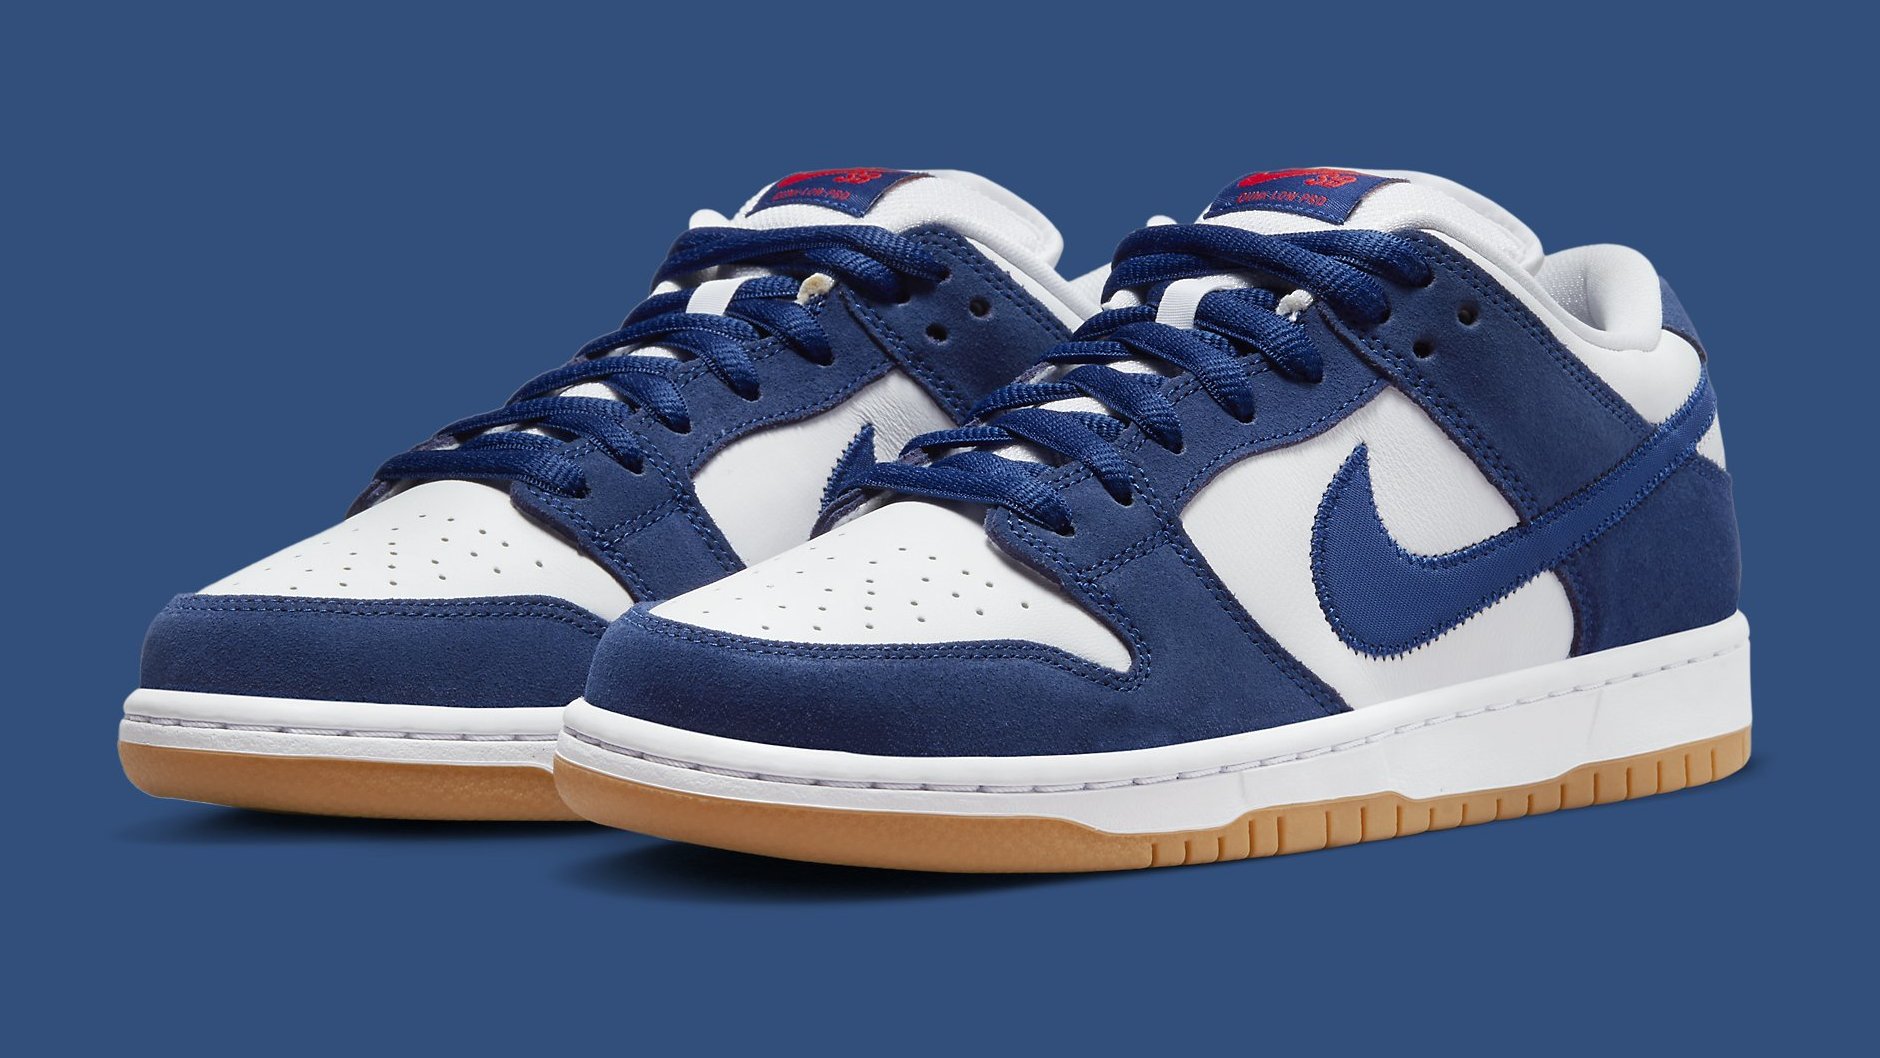 Dodger Covers This Nike SB Dunk | Complex